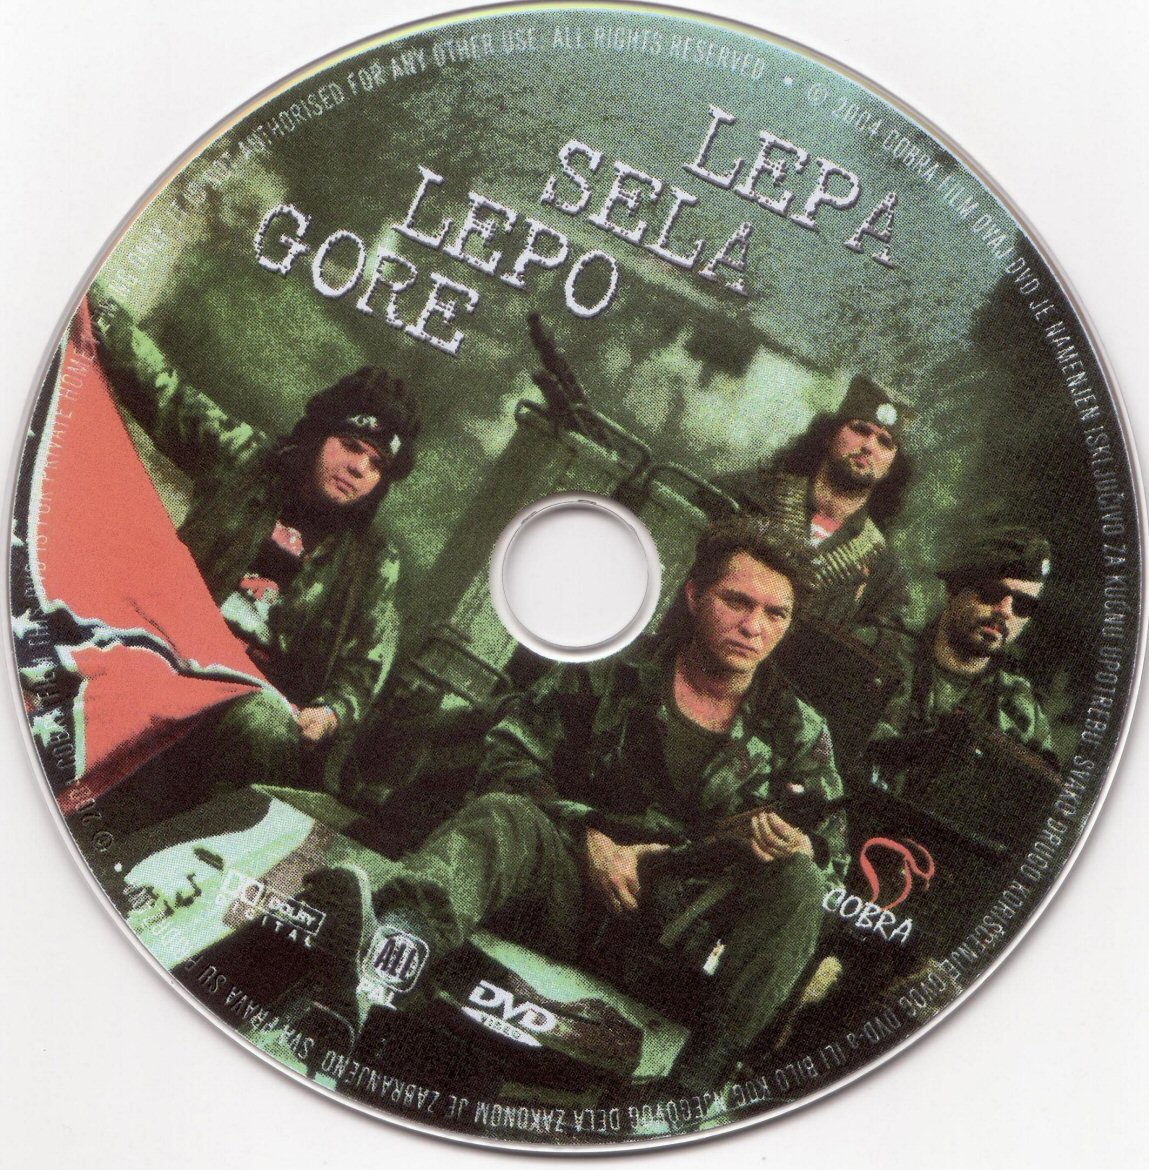 Click to view full size image -  DVD Cover - L - DVD - LEPA SELA LEPO GORE - CD - DVD - LEPA SELA LEPO GORE - CD.JPG